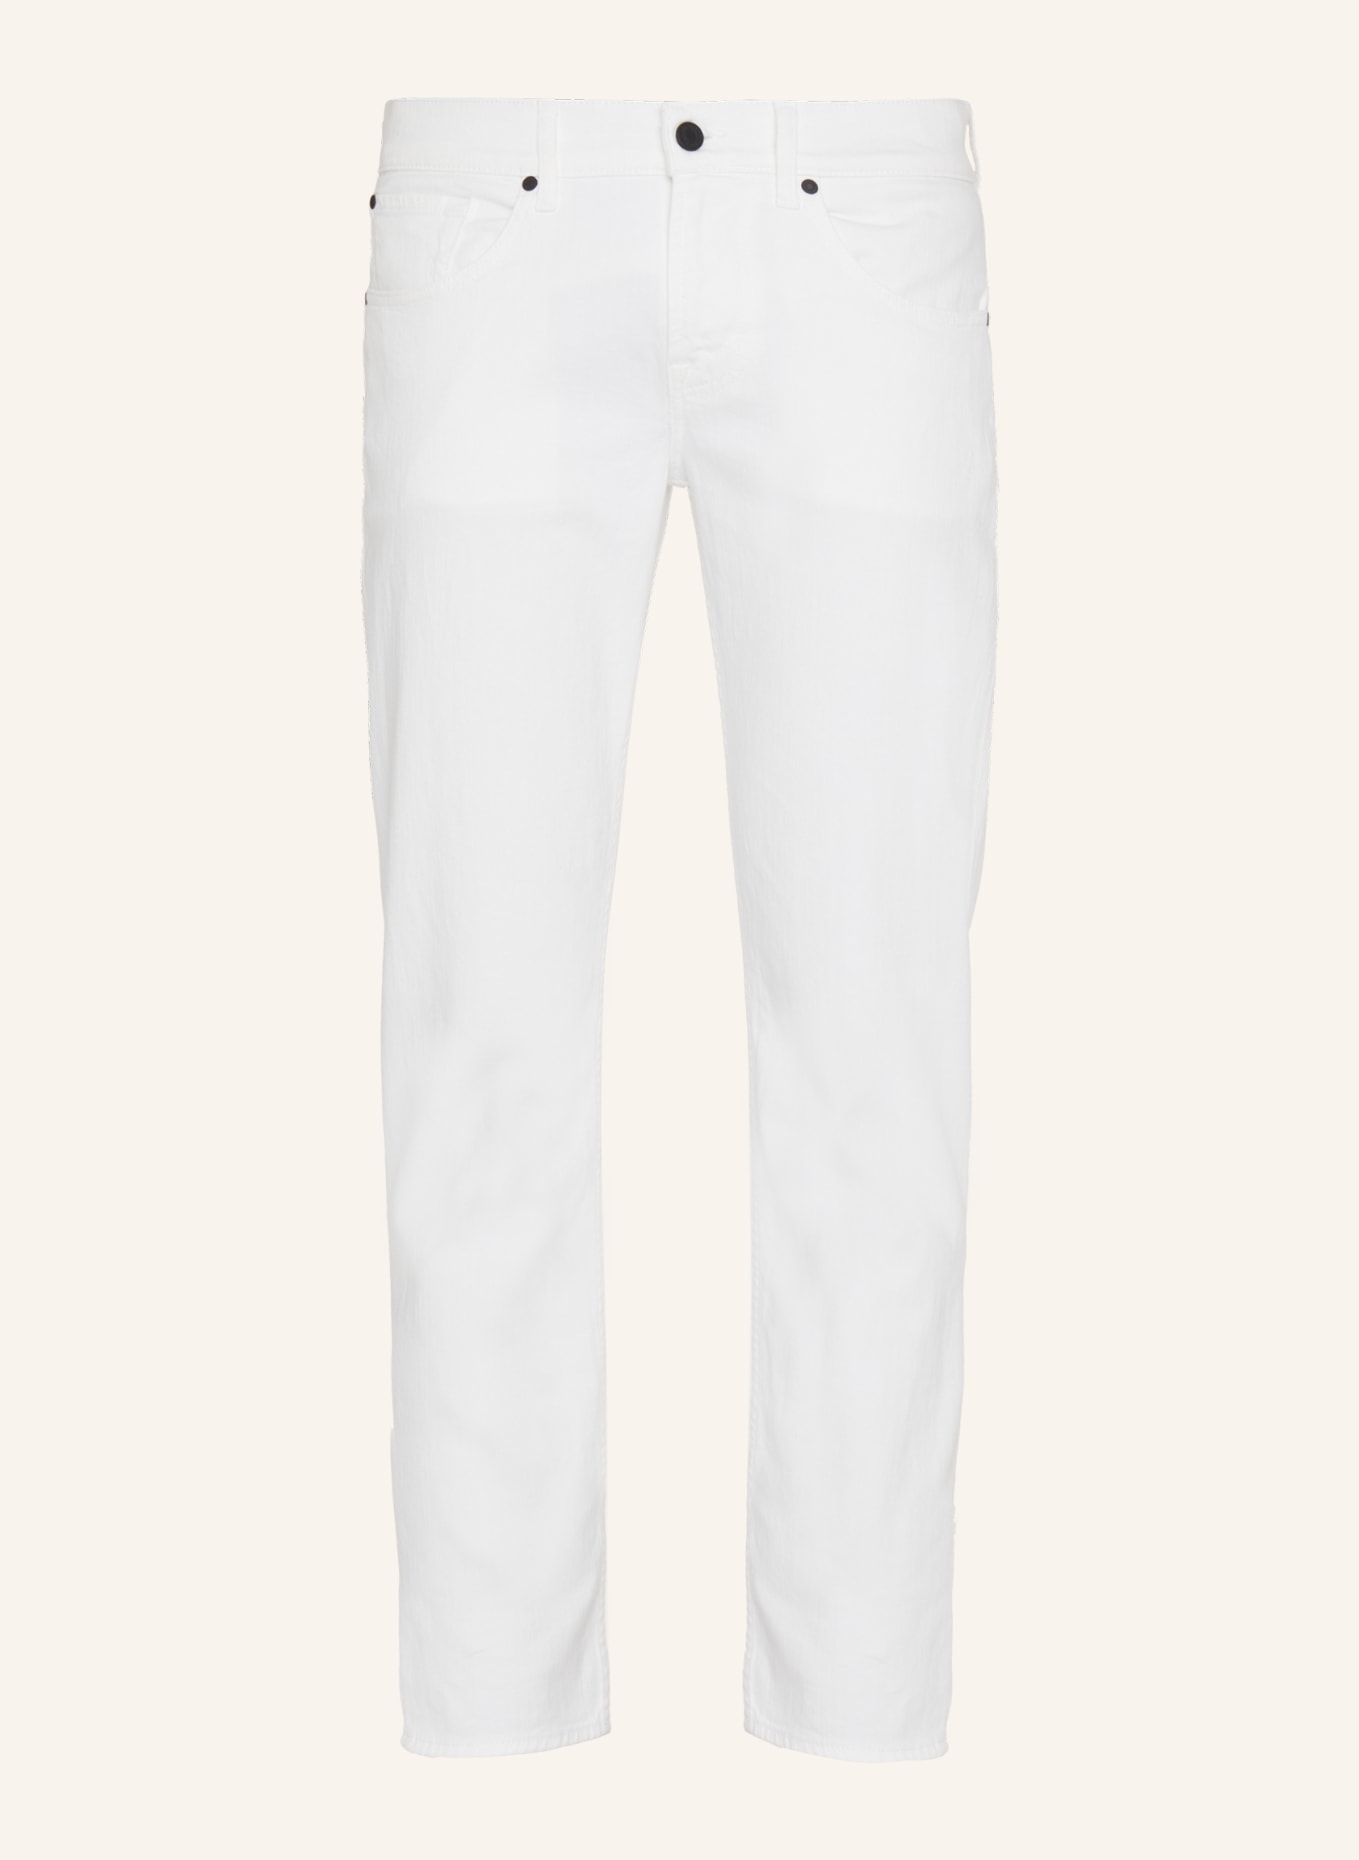 7 for all mankind Jeans SLIMMY TAPERED Slim fit, Farbe: WEISS (Bild 1)